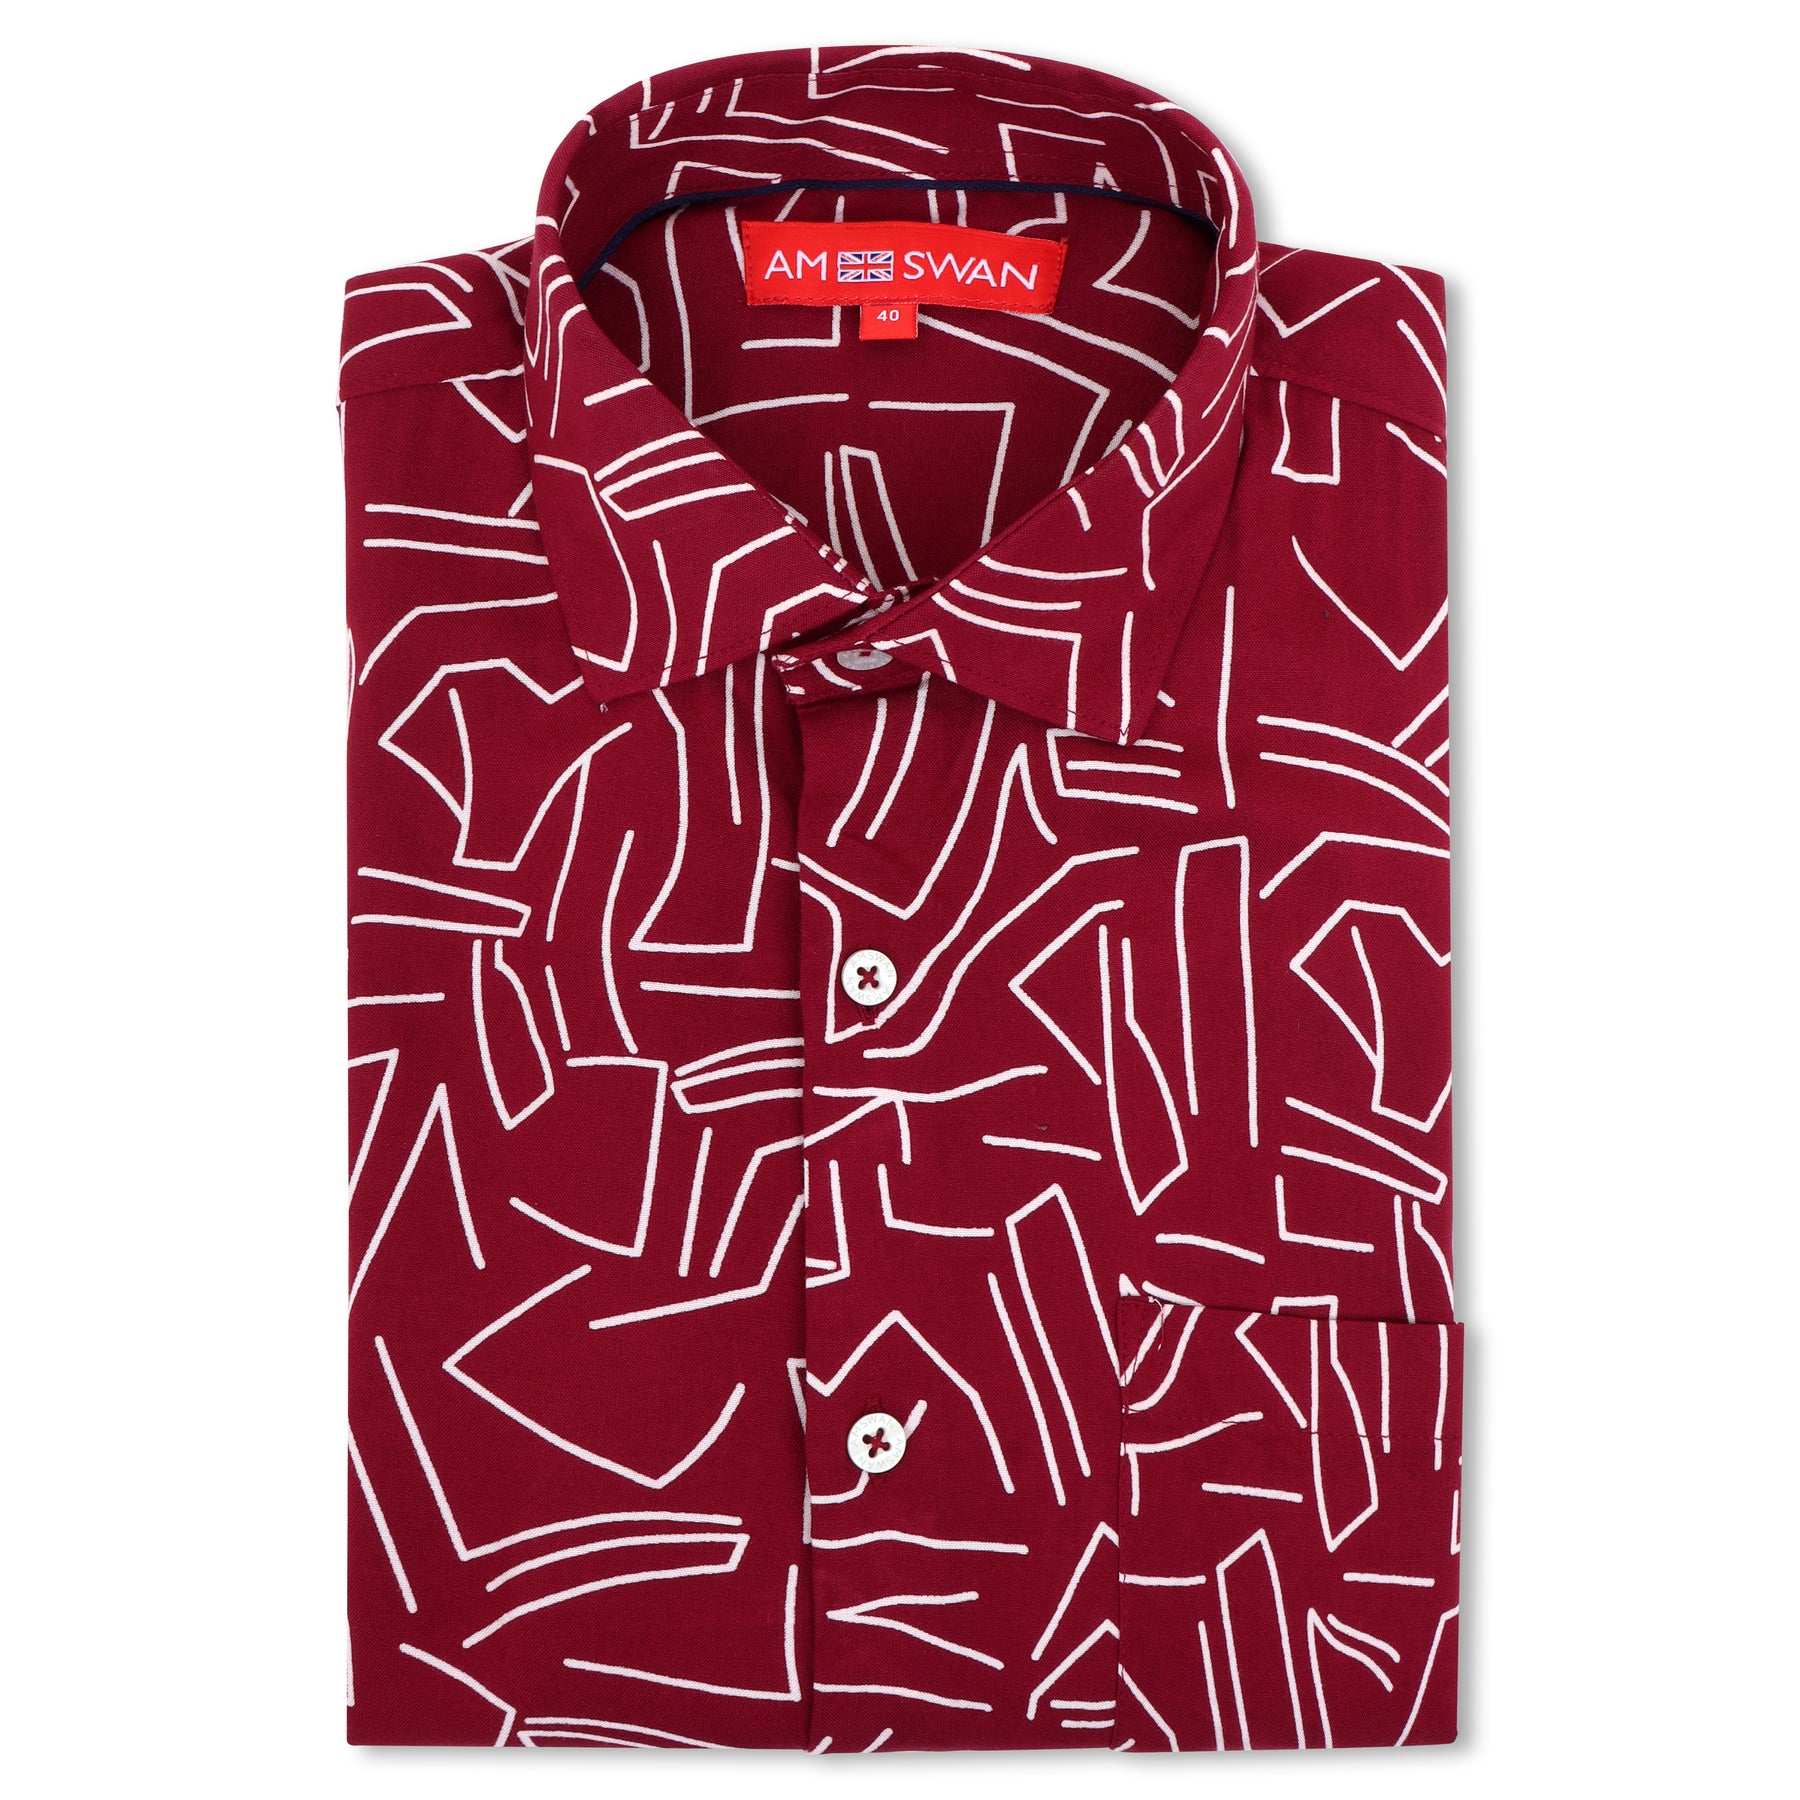 Premium Rayon Shirt For Men With Spread Collar And Smart Fit In Self Design